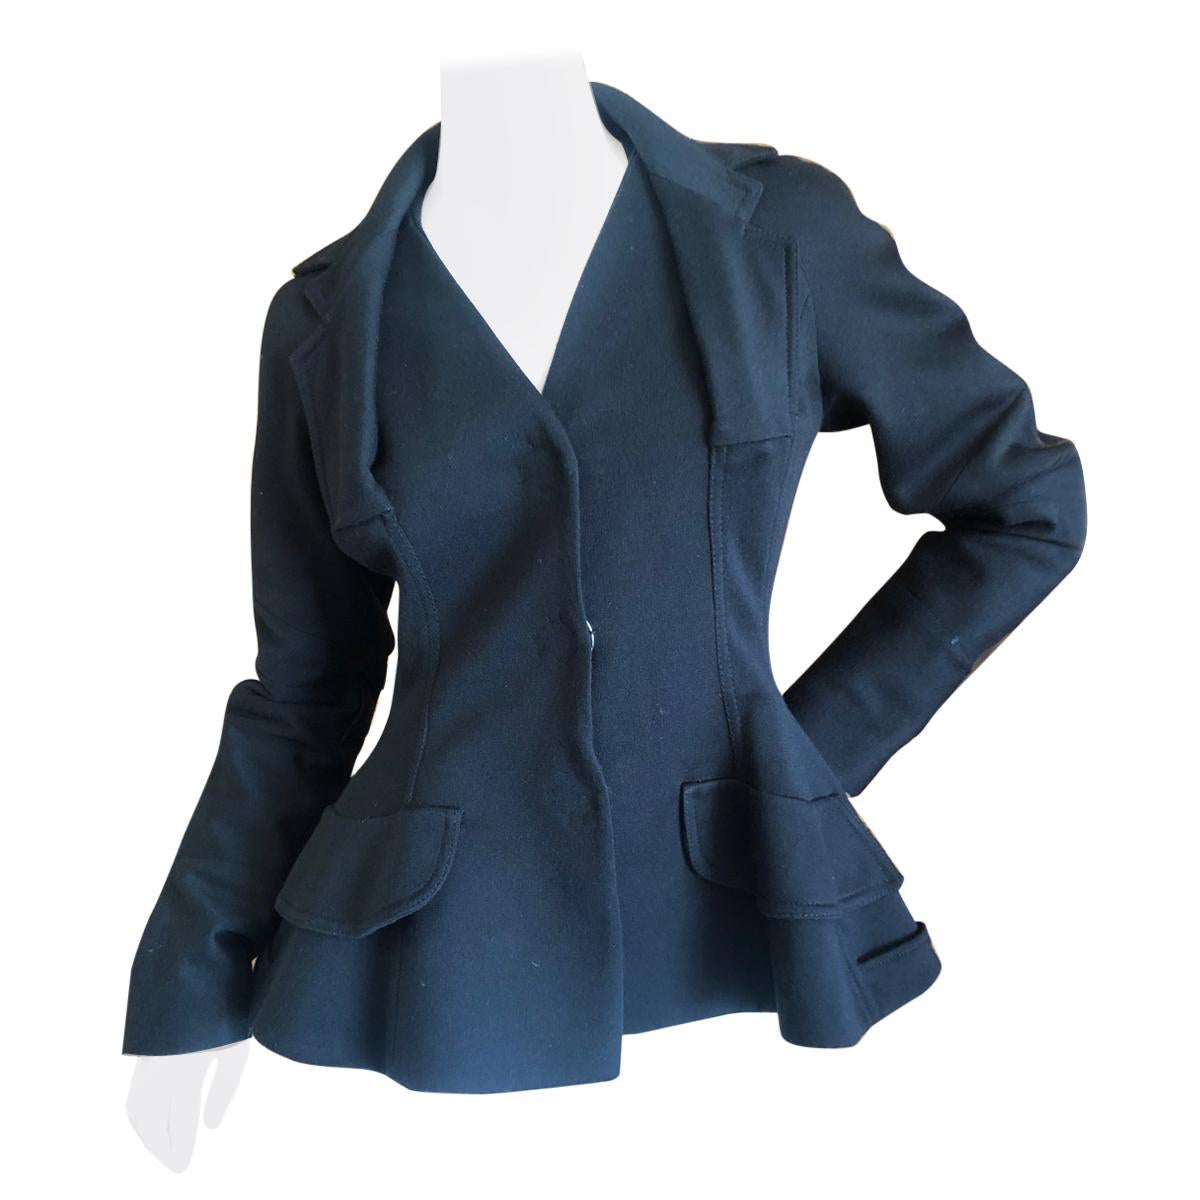 Dior by Galliano Black Jersey "Bar" Jacket with Exaggerated Peplum Hips For Sale